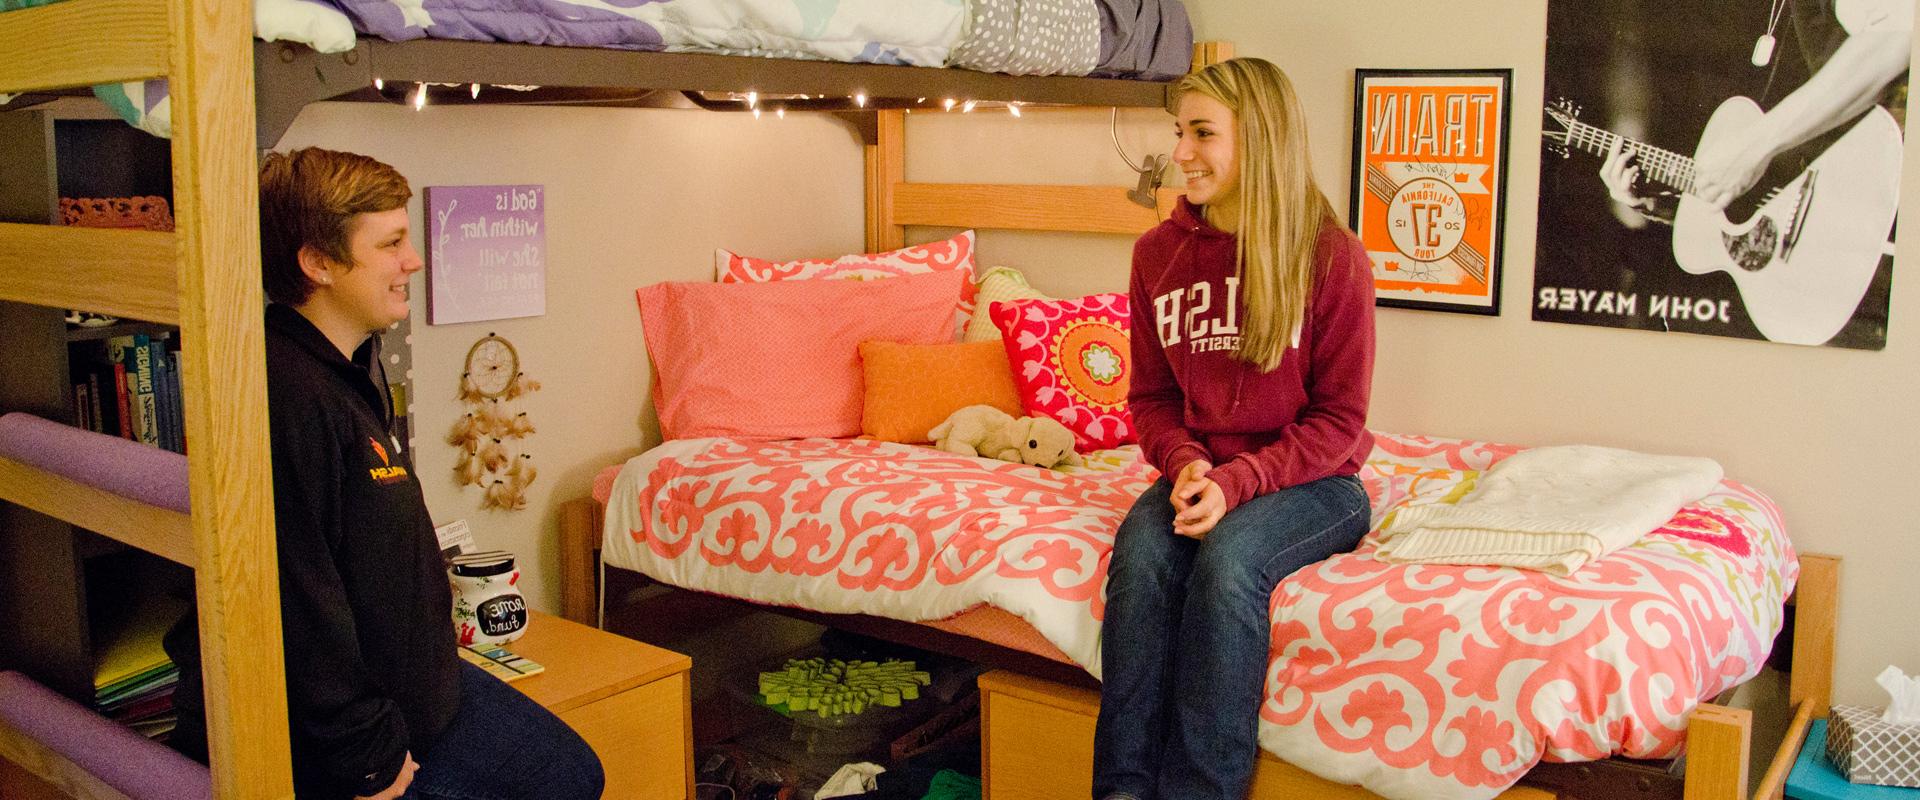 photo of two students conversing in a dorm room